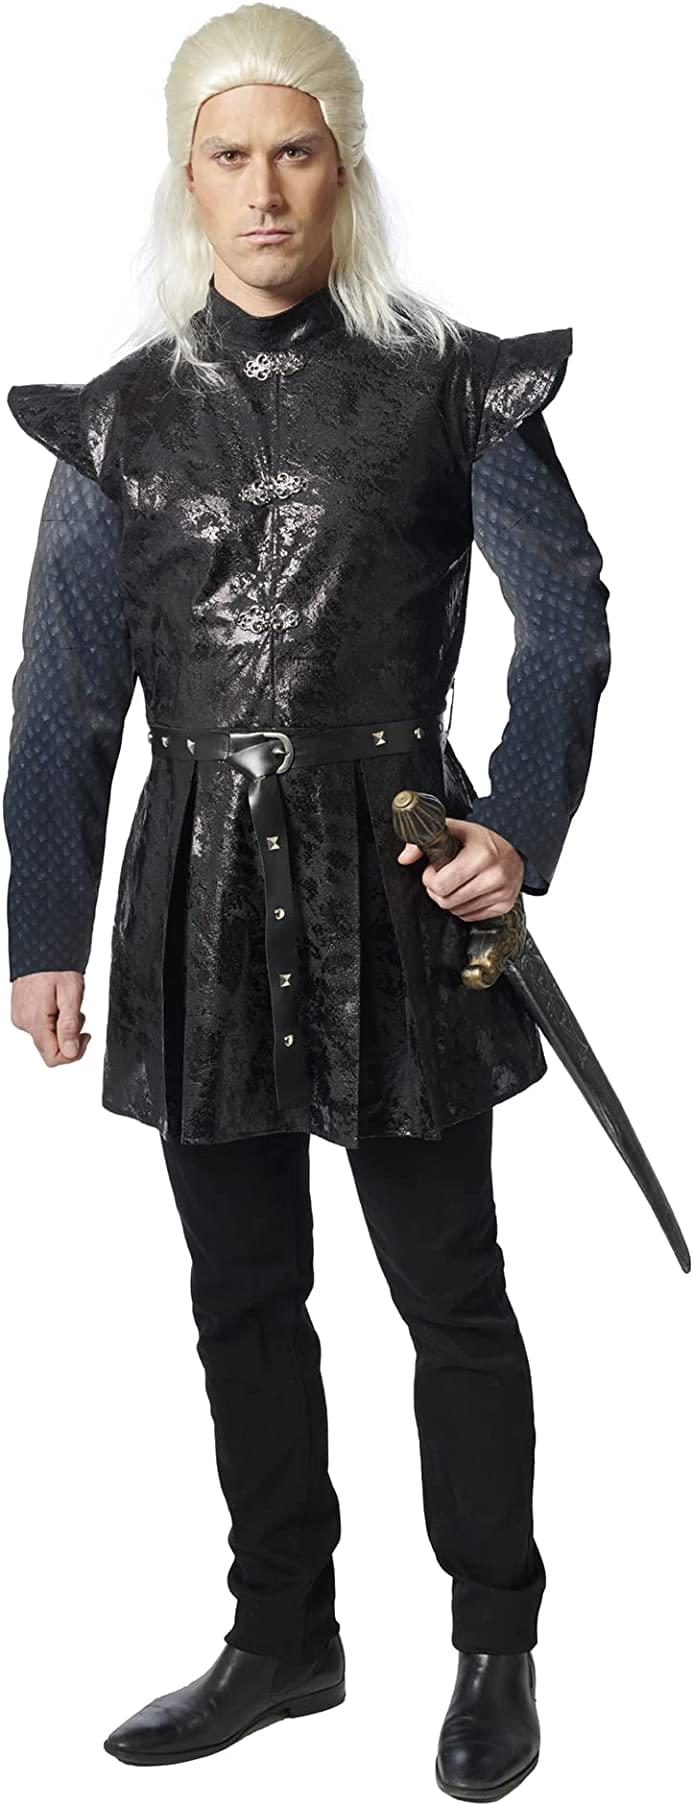 Ancient Prince Tunic Adult Costume | Standard